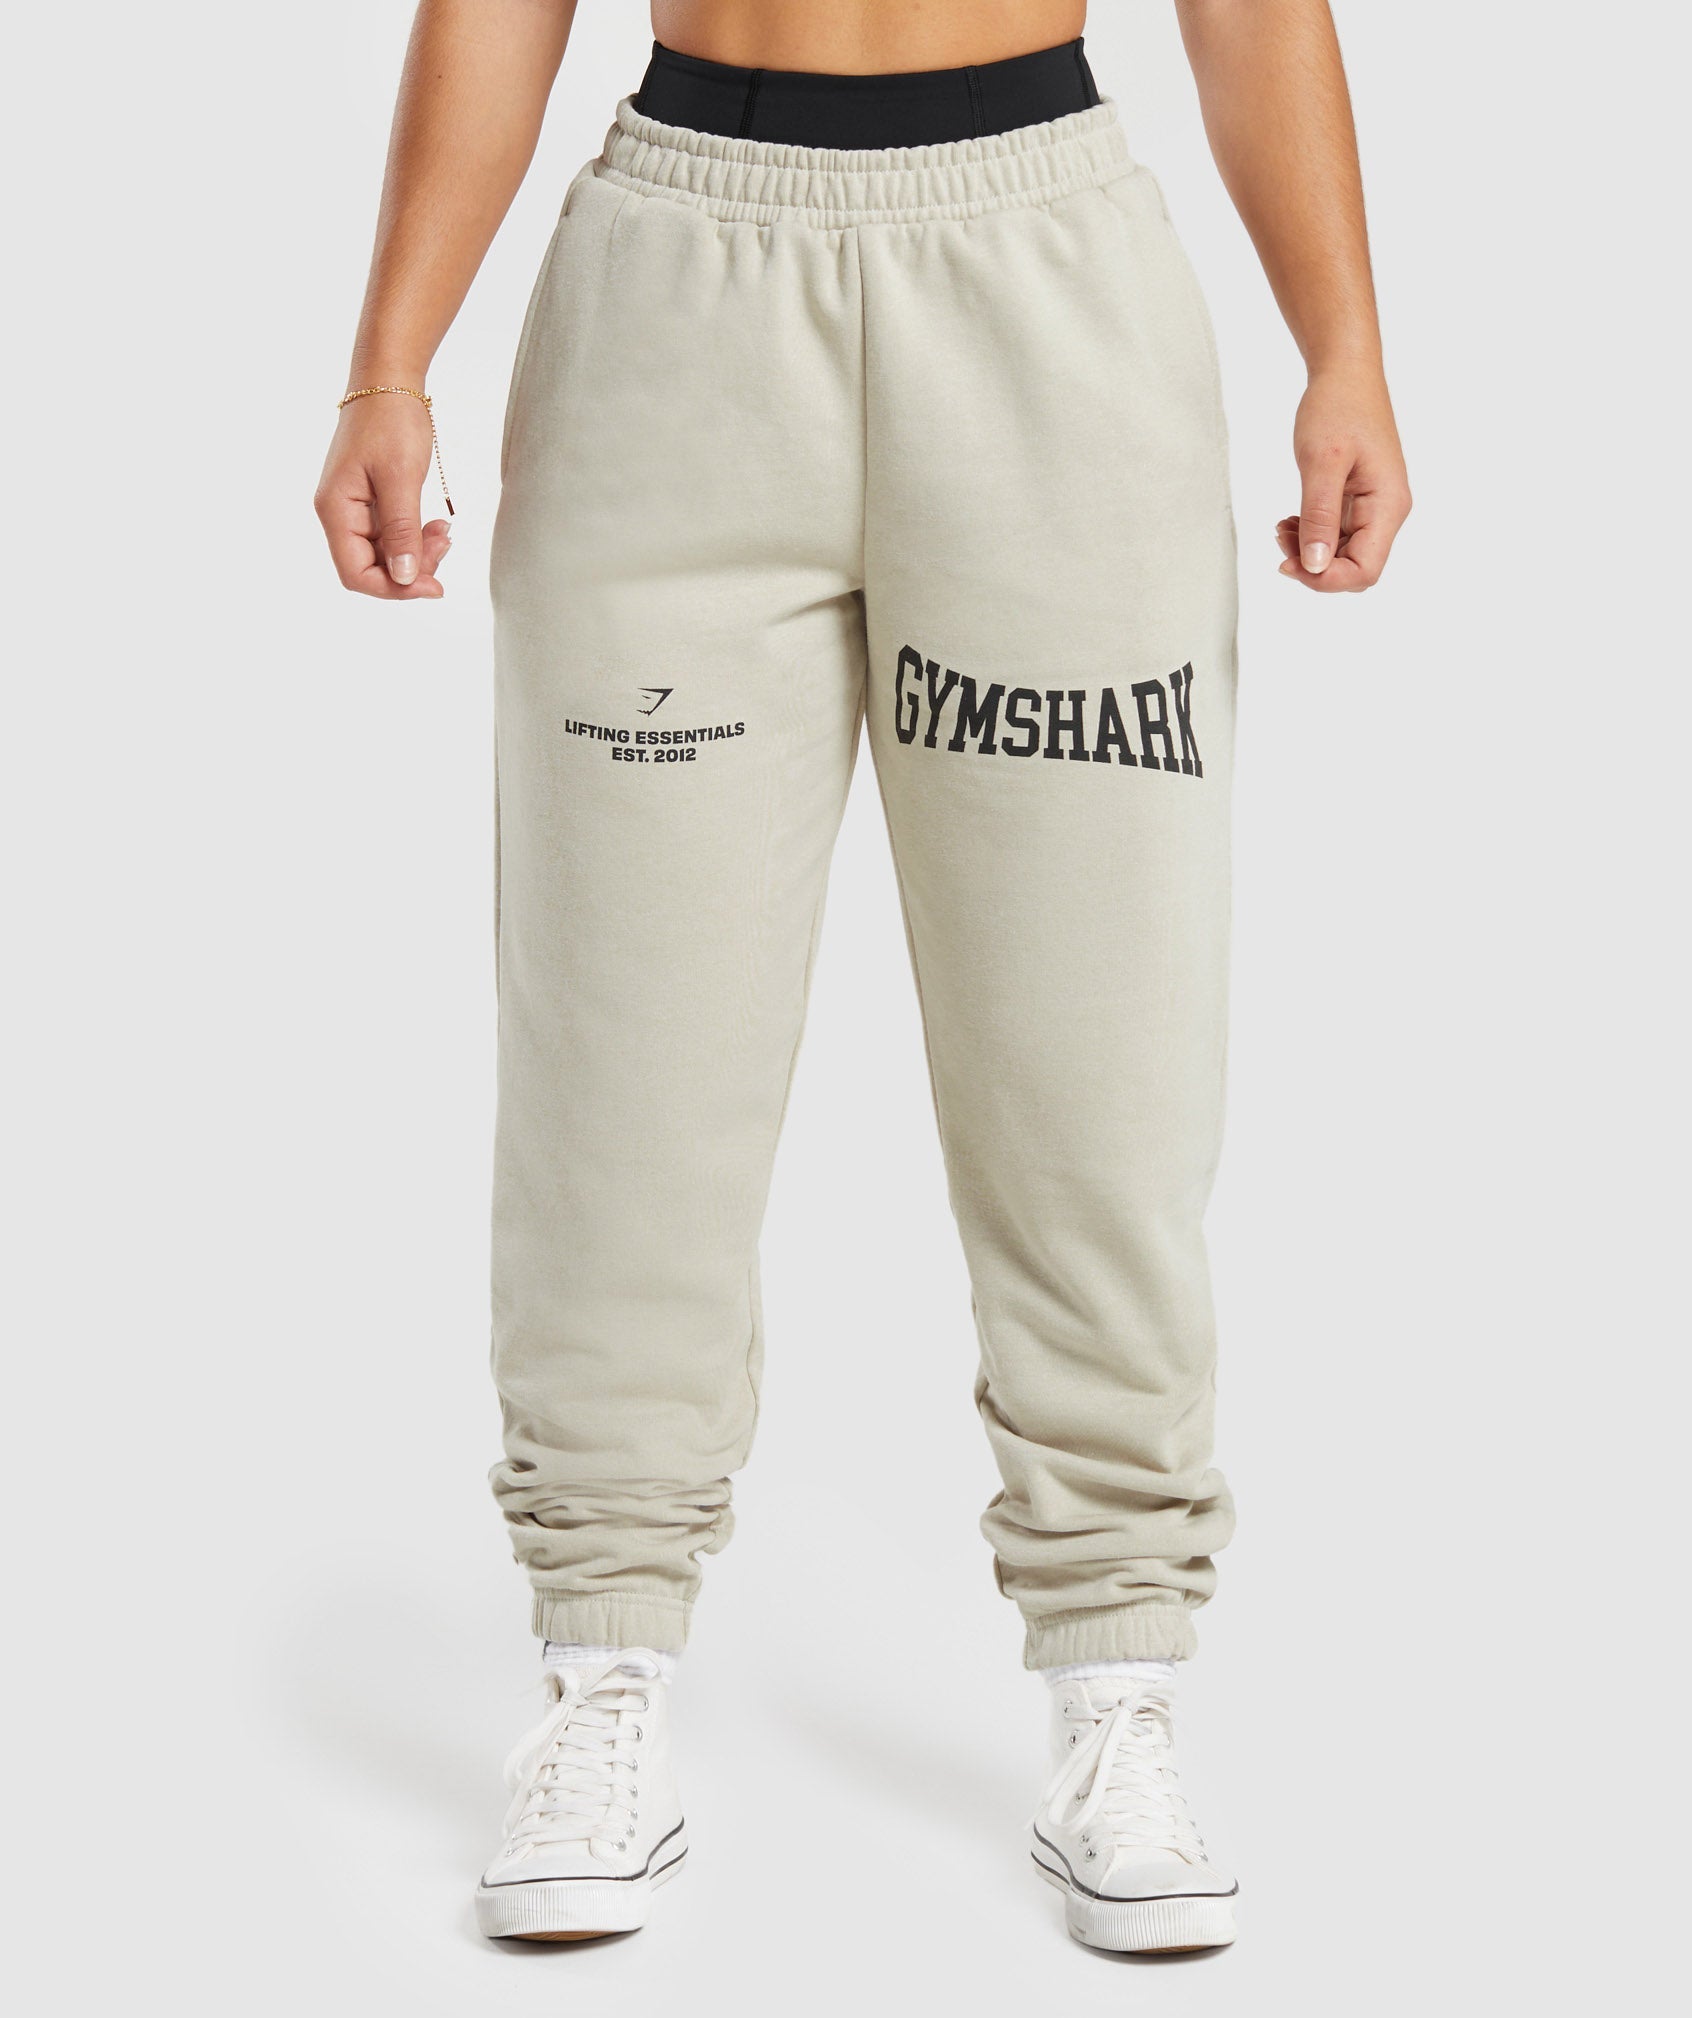 Gymshark Lifting Essentials Graphic Joggers - Pebble Grey